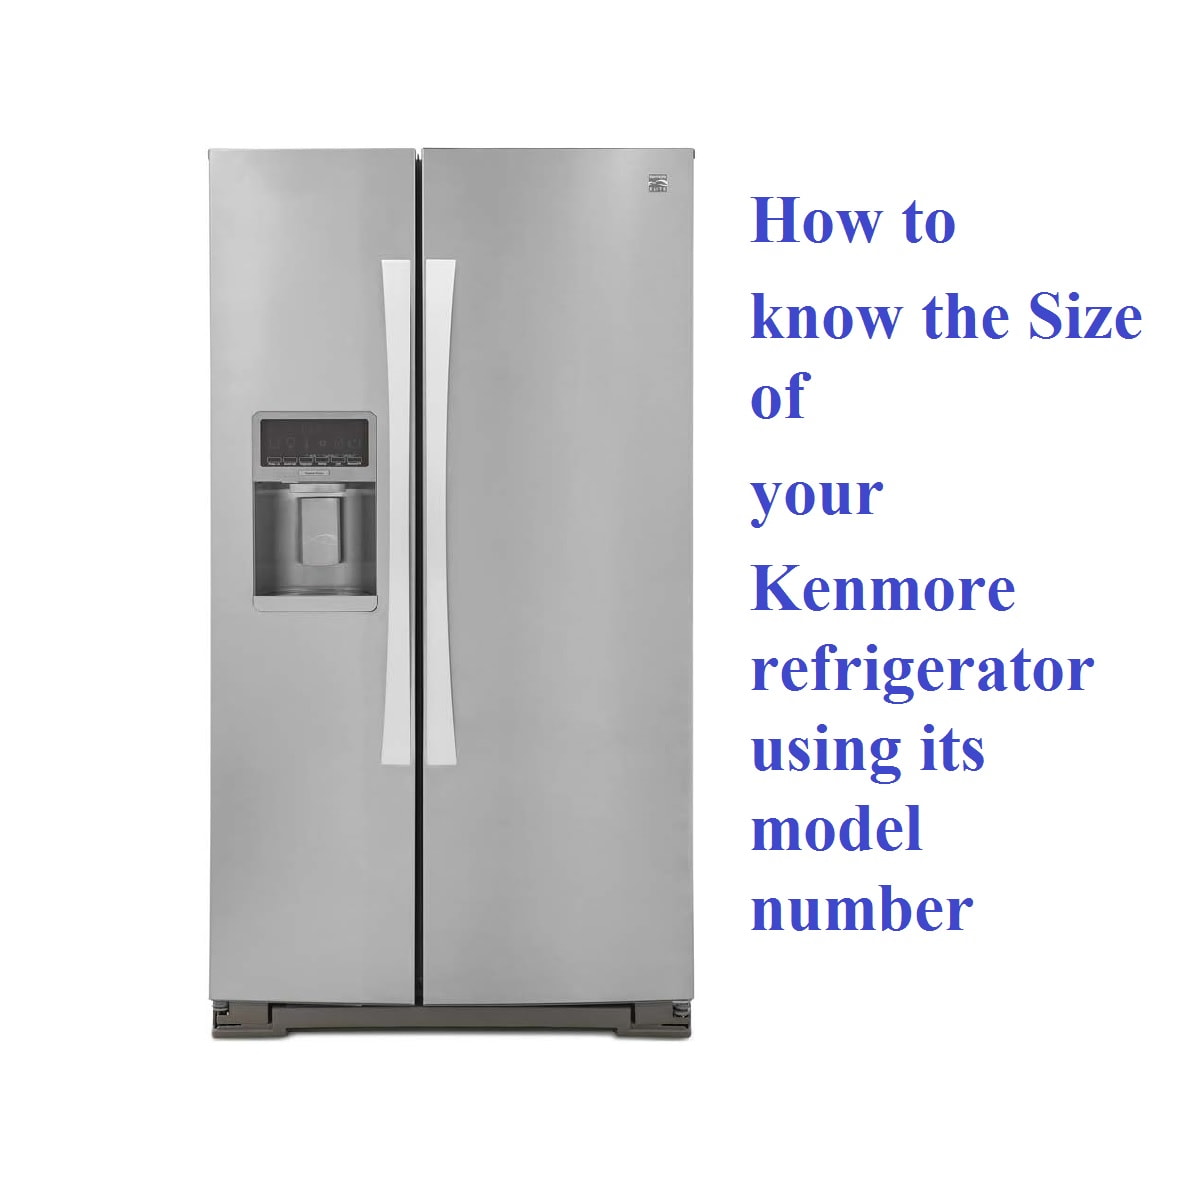 Kenmore refrigerator size by model number